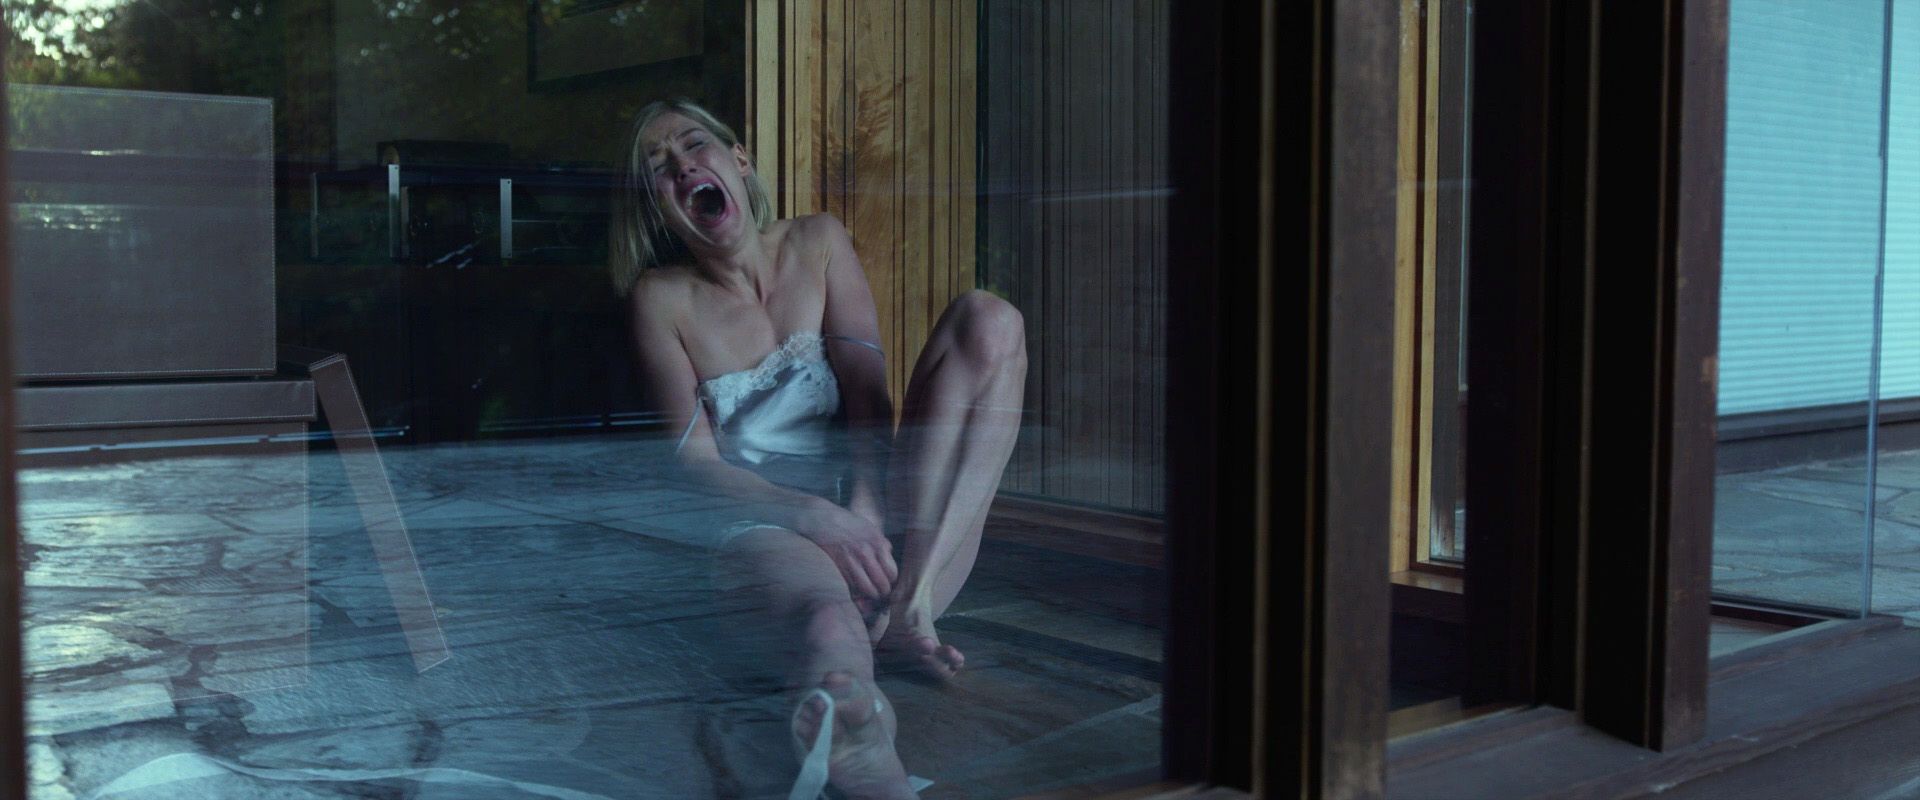 Rosamund Pike Nude – Gone Girl (6 Pics + Video) 1